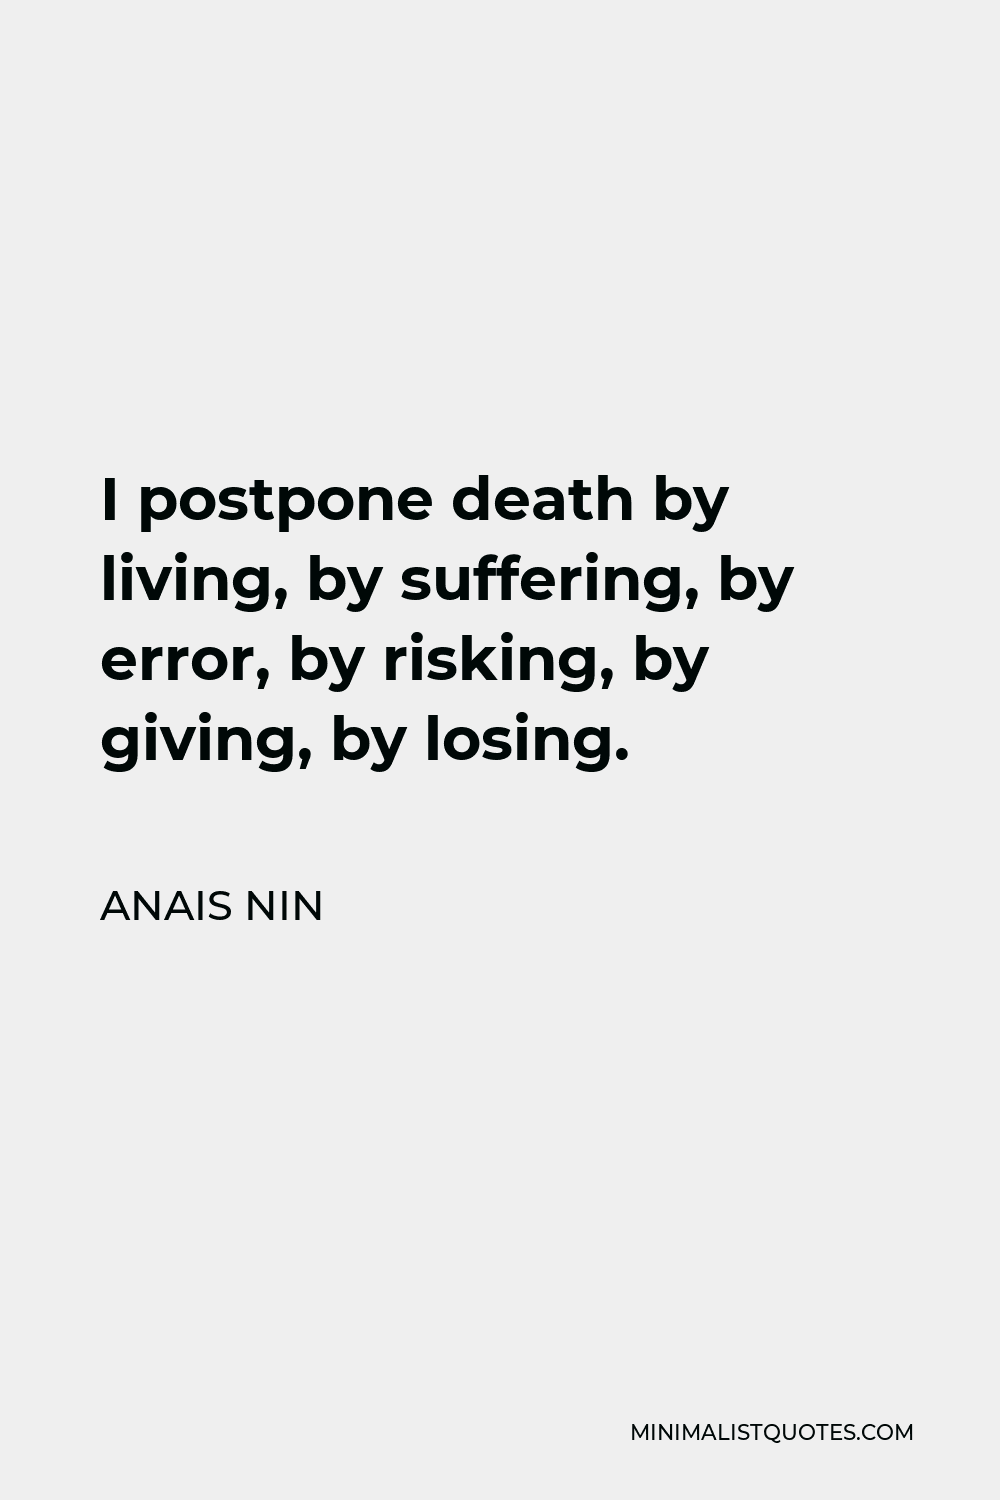 Anais Nin Quote - I postpone death by living, by suffering, by error, by risking, by giving, by losing.